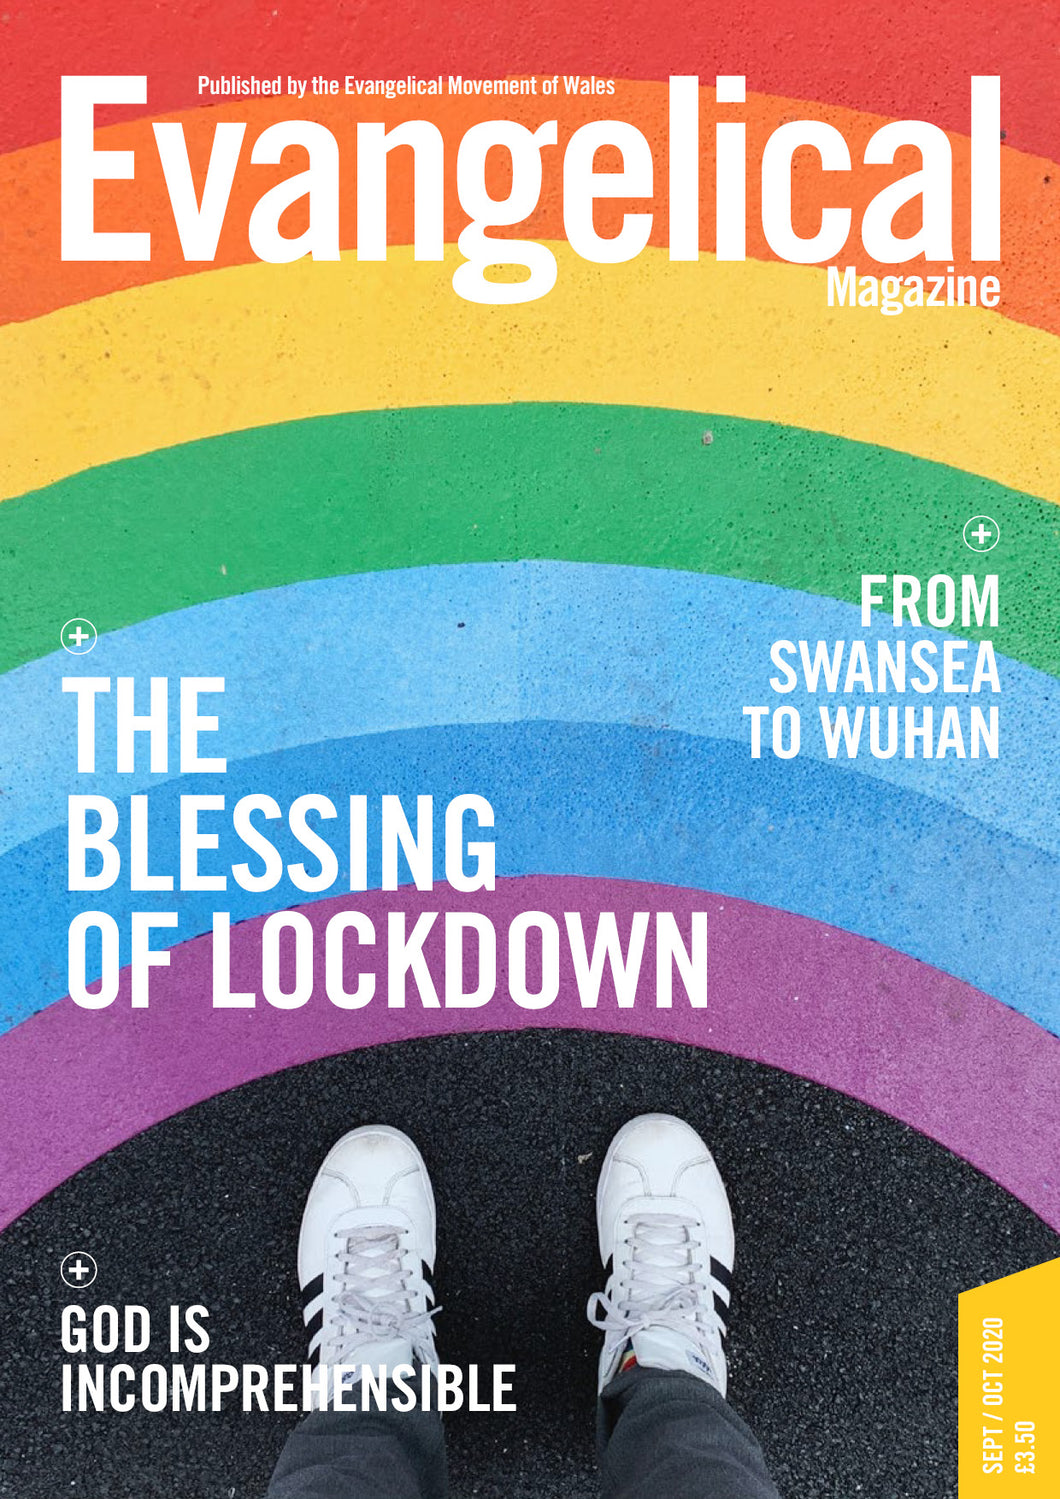 The Evangelical Magazine - 5 pack